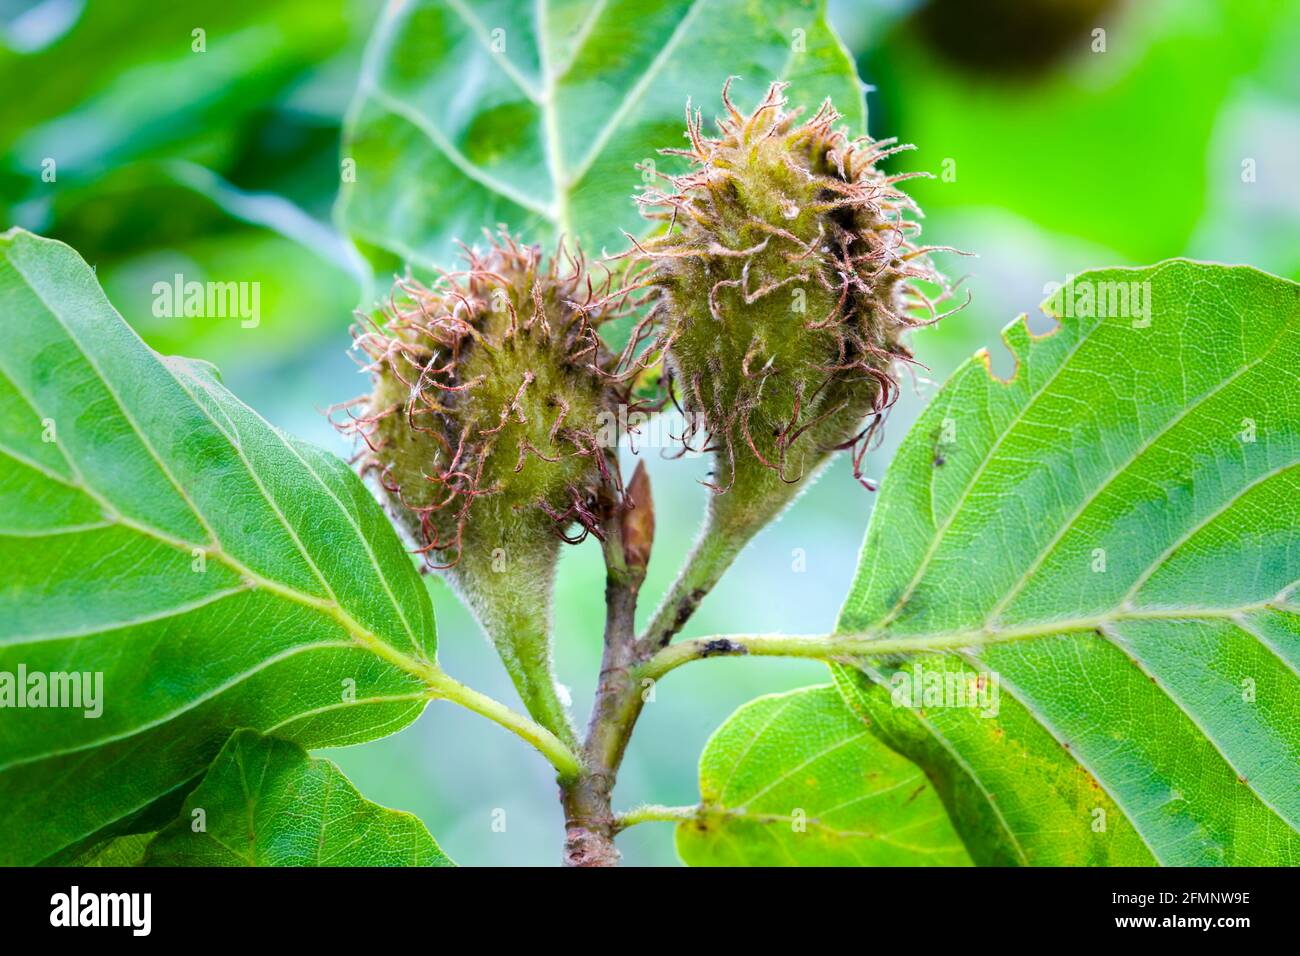 Common or European Beech tree Fagus sylvatica nuts also know as beechmast growing on tree prior to ripening Stock Photo